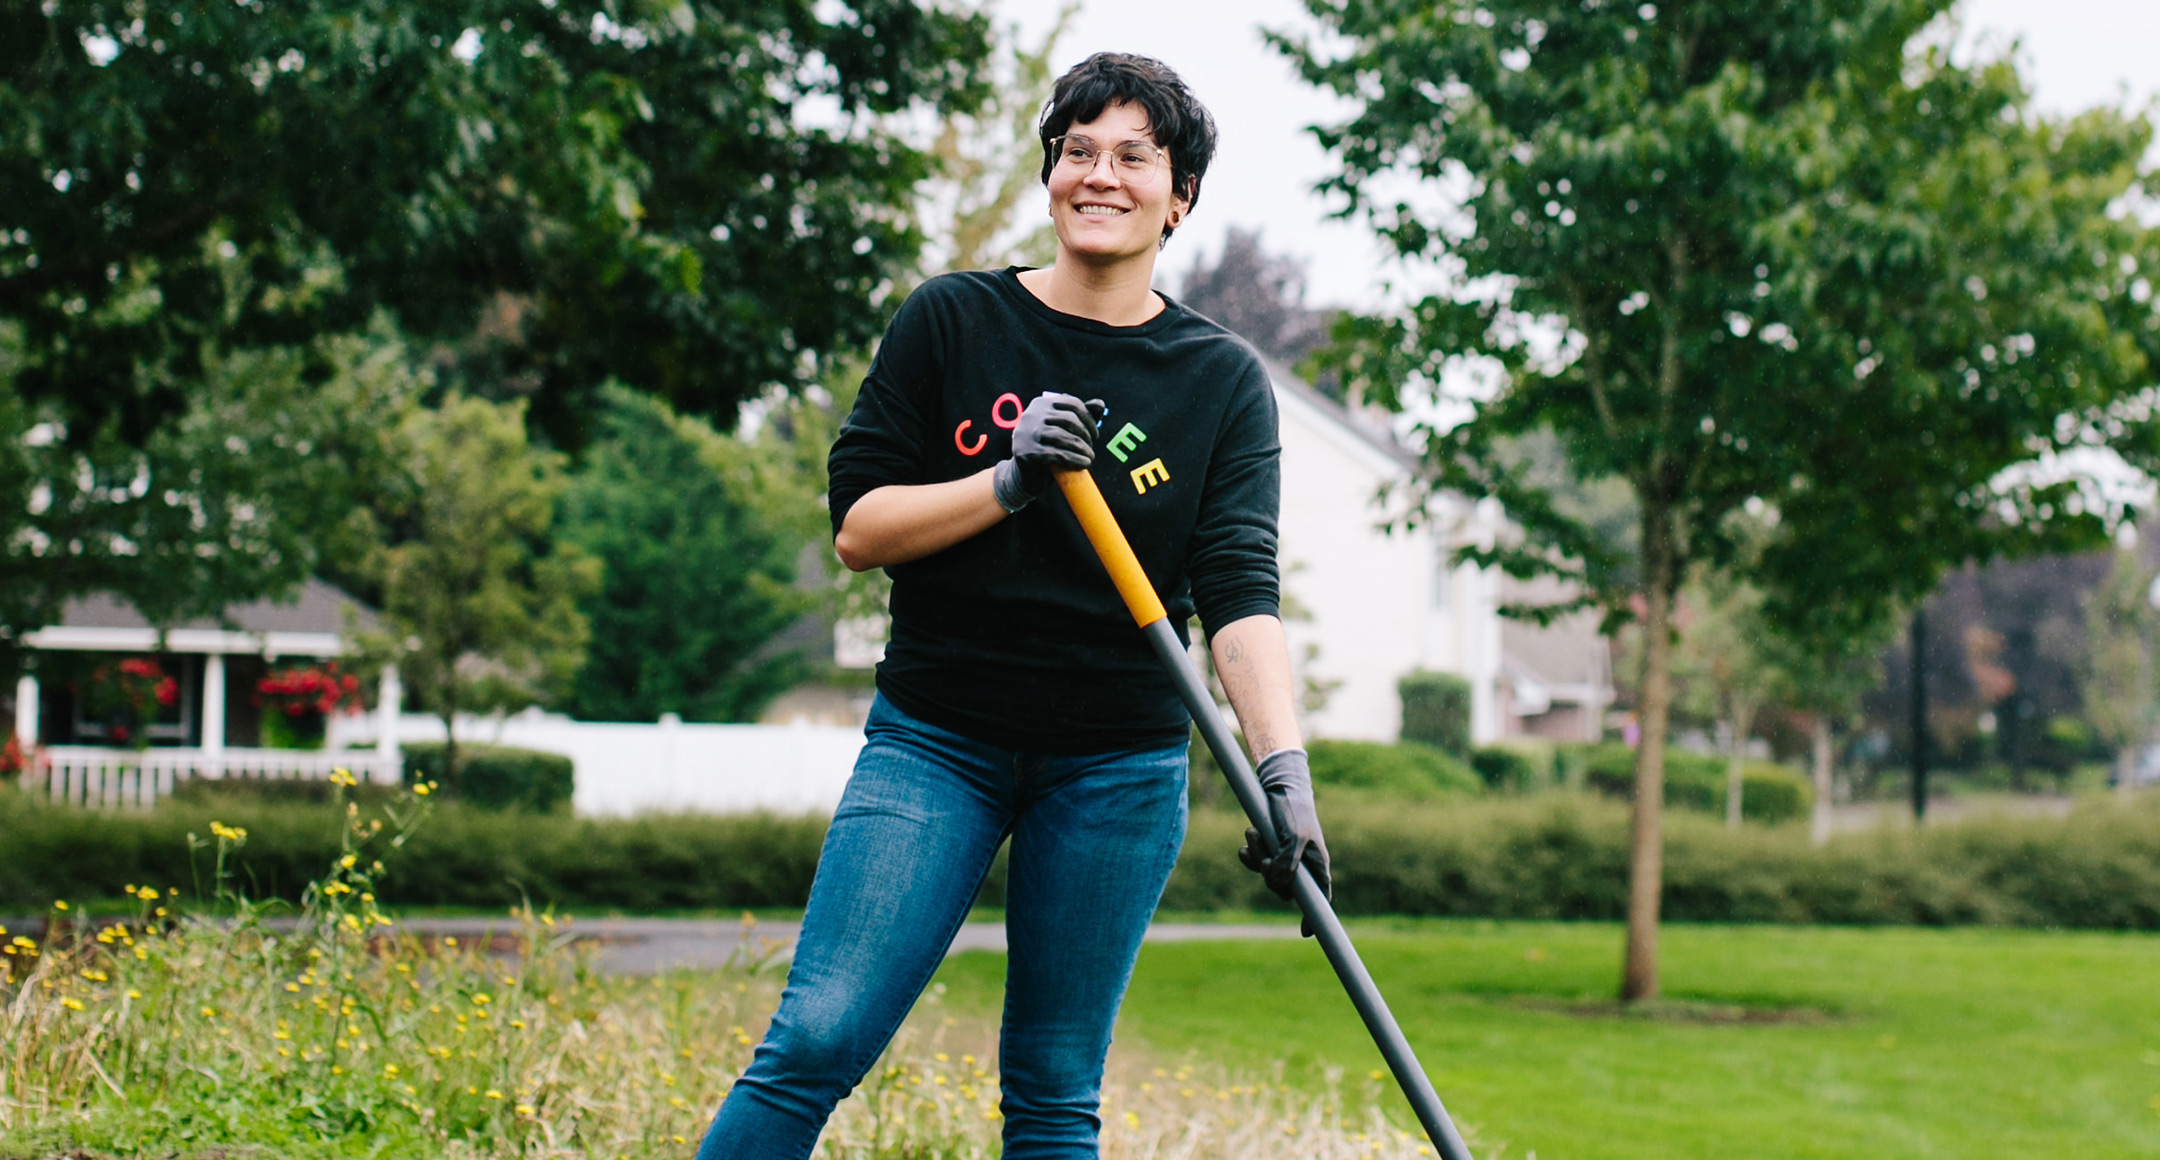 Staff member on a Lend a Hand activity holding a rake and wearing gardening gloves in a field.